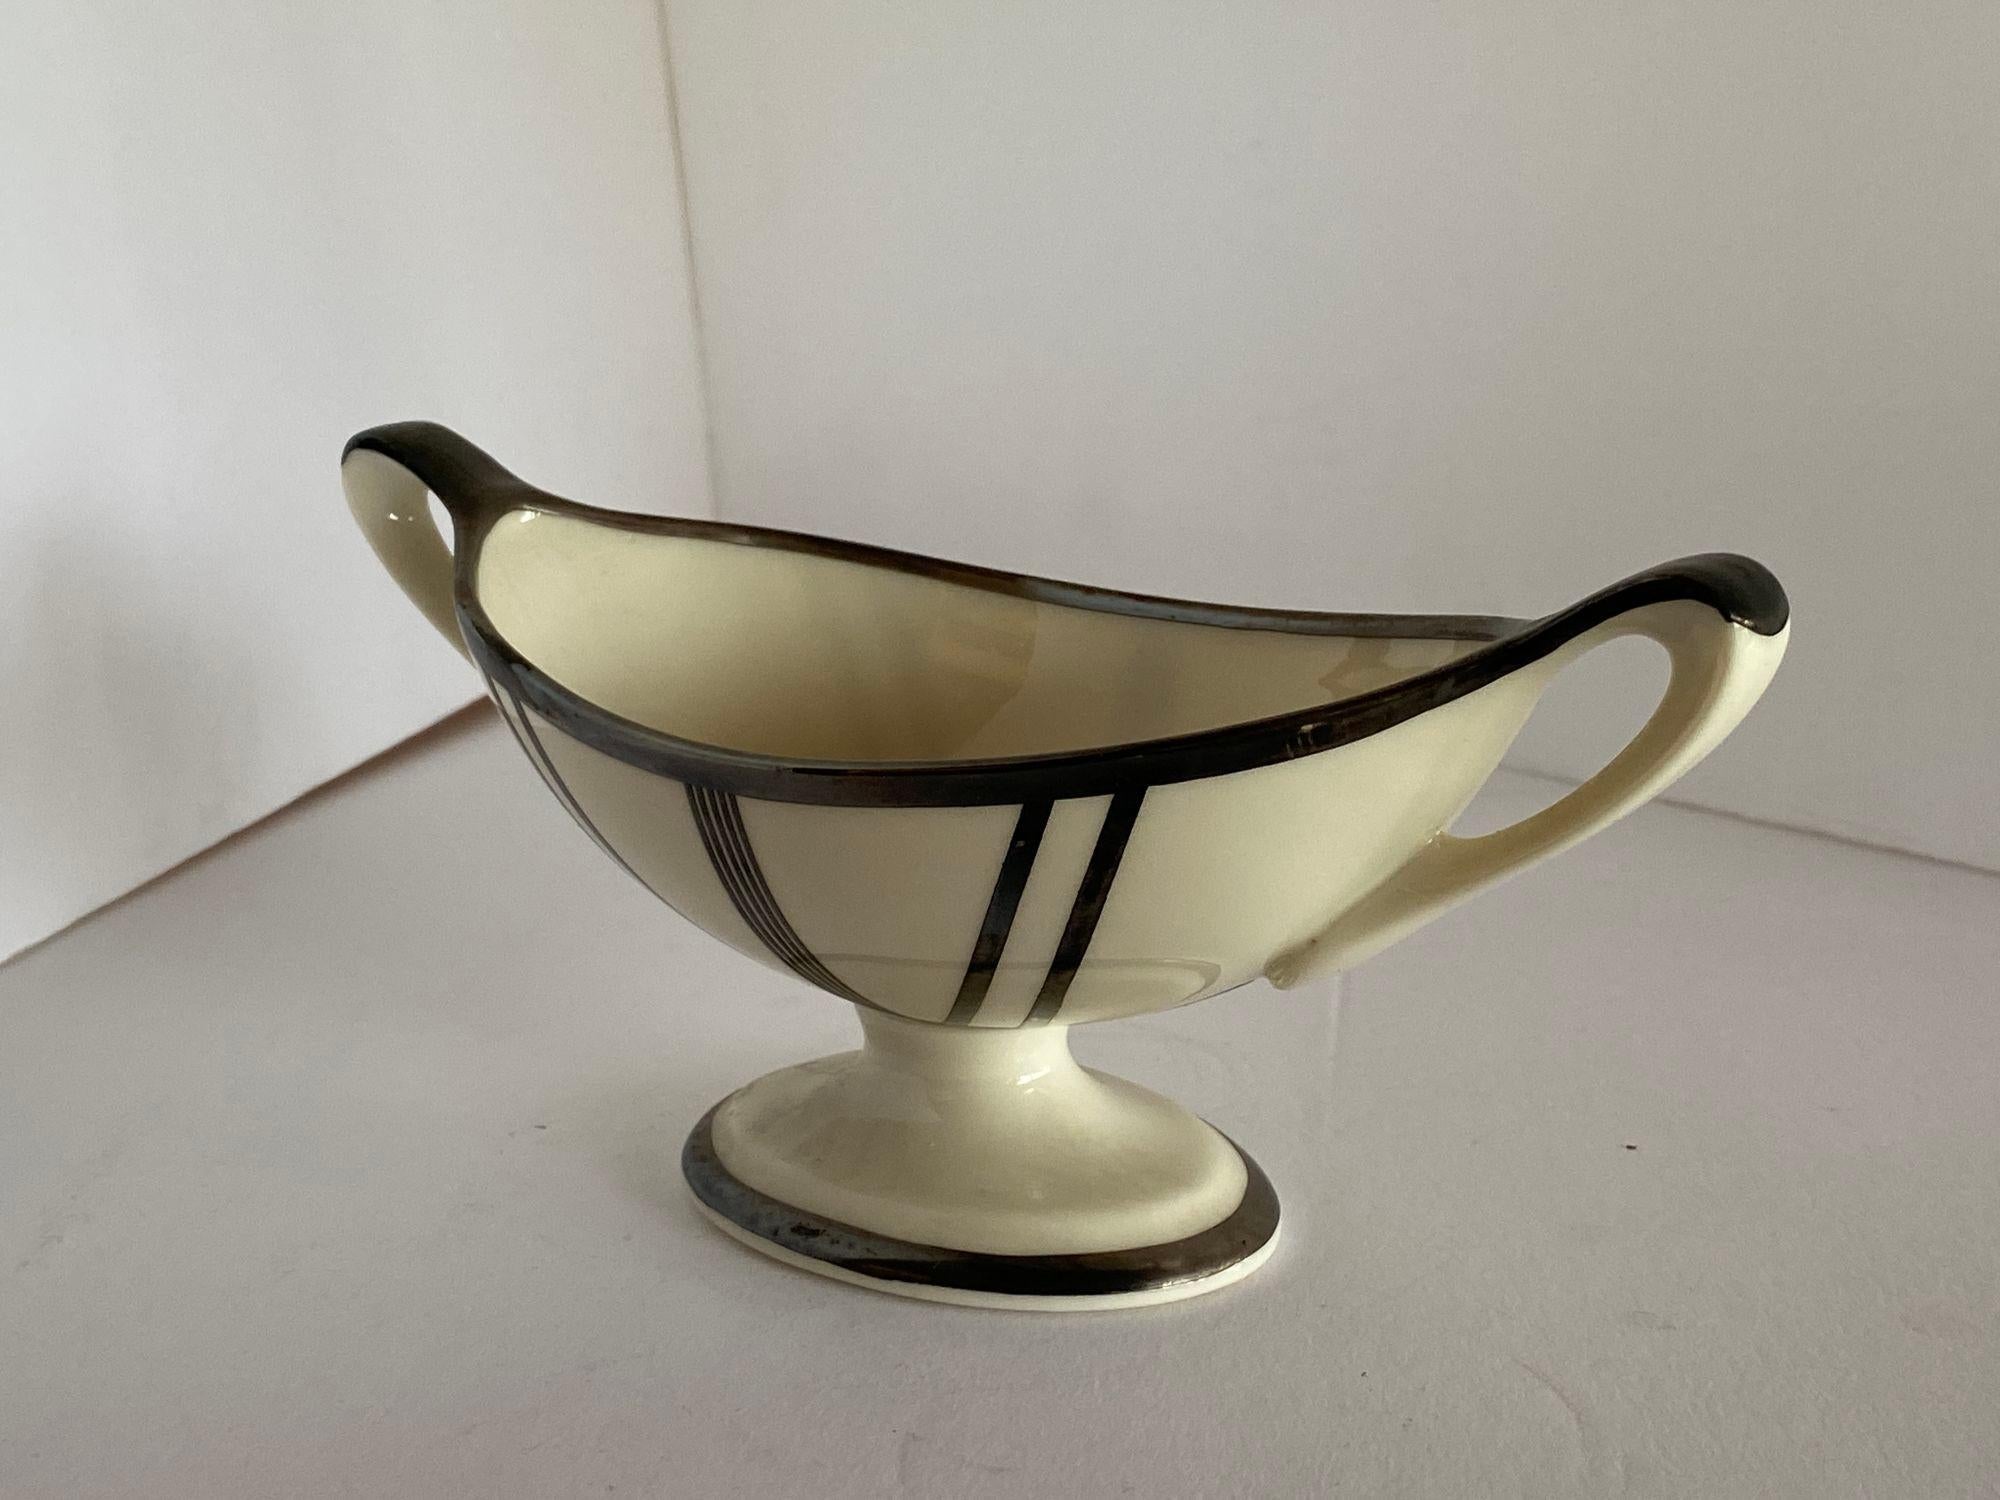 Two-Piece Sugar Bowl and Candelabra with Sterling Silver Overlay by Lenox In Excellent Condition For Sale In Van Nuys, CA